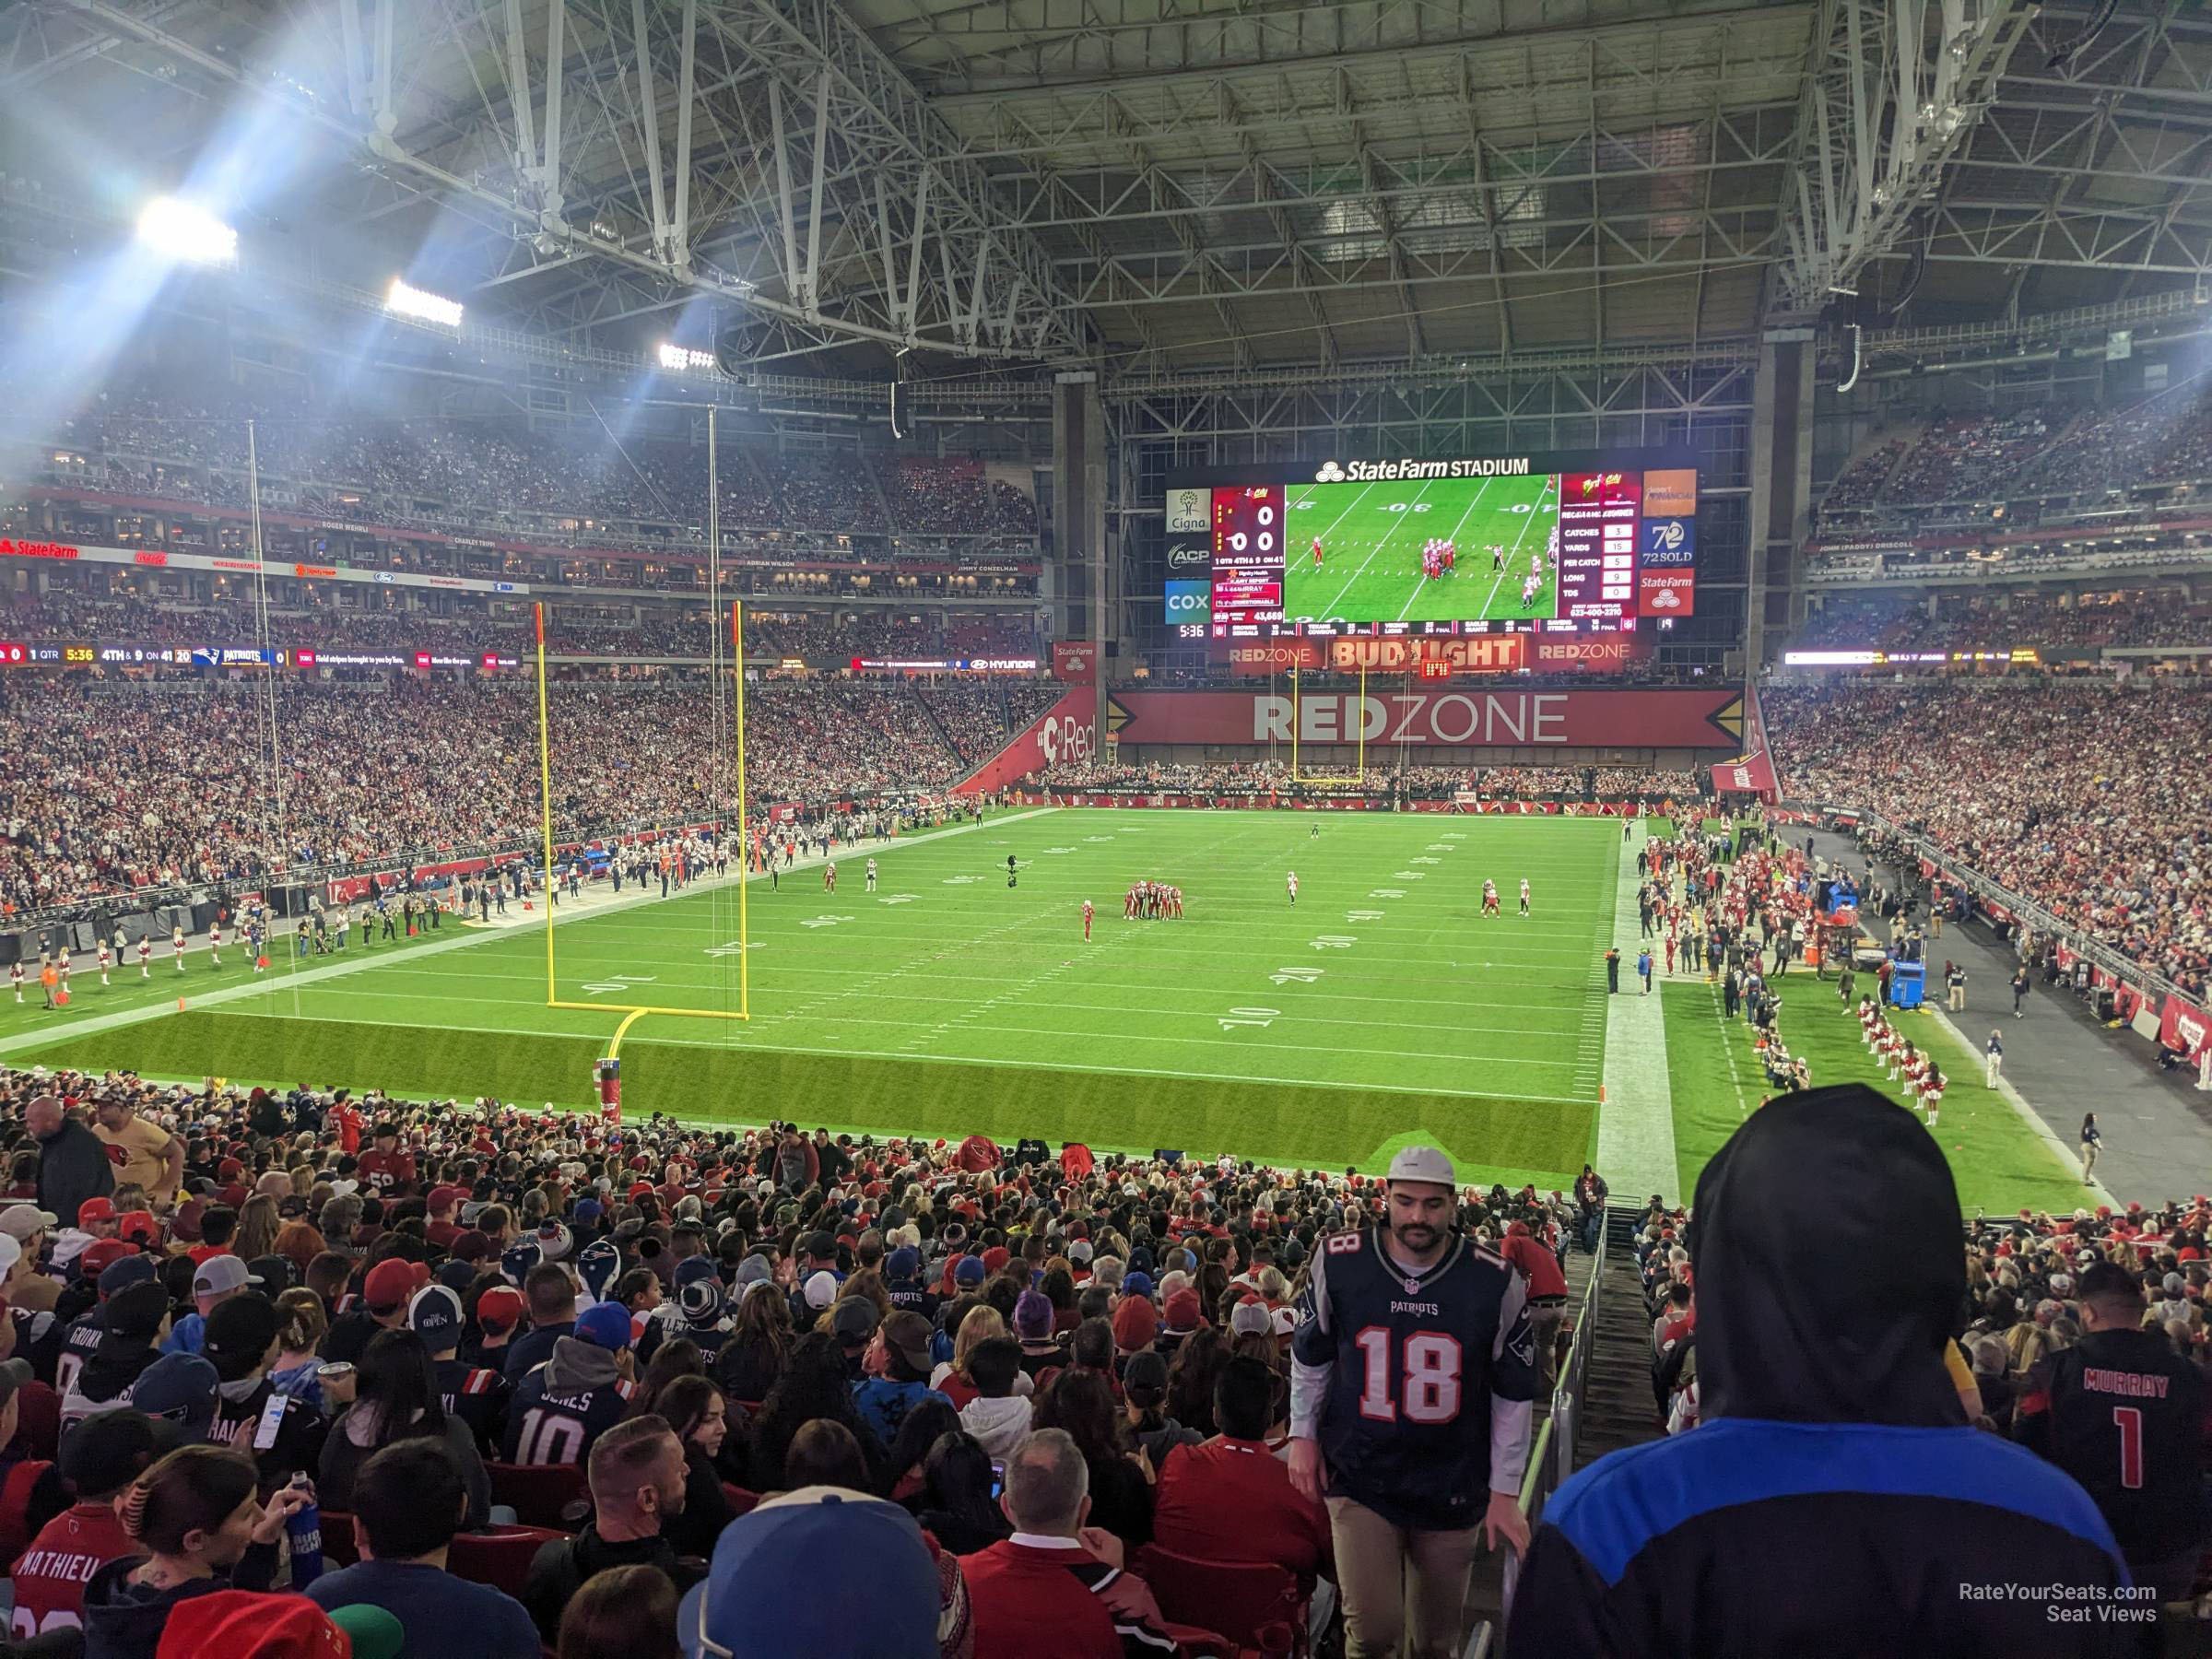 section 117, row 41 seat view  for football - state farm stadium